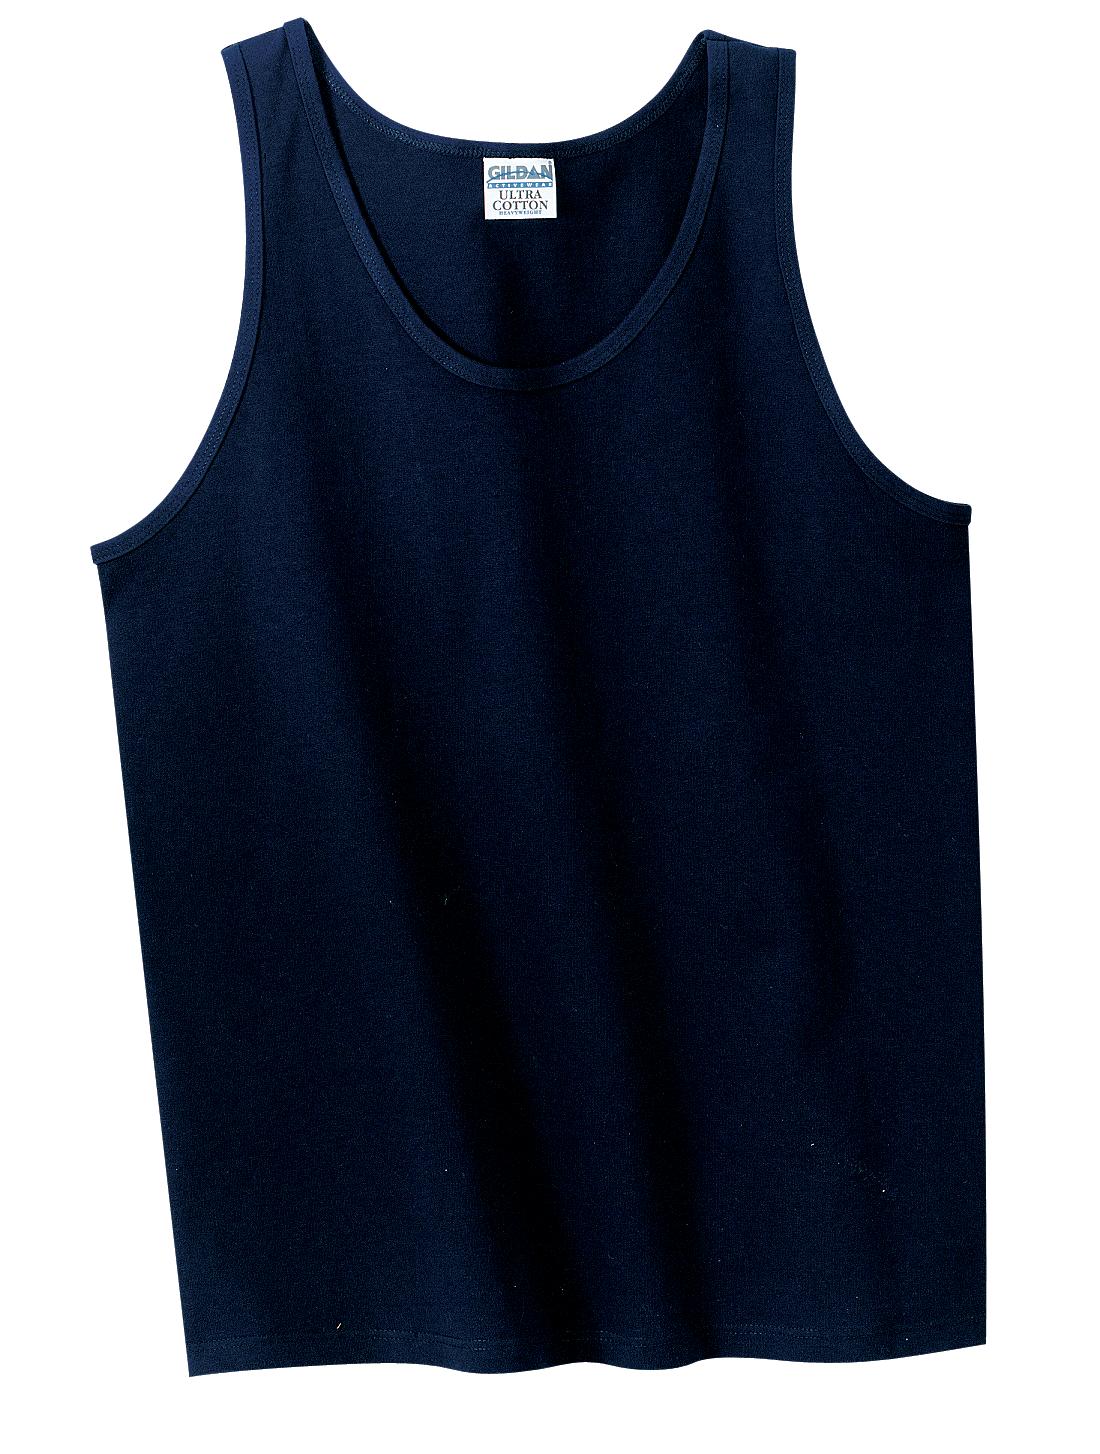 Normal is Boring - Men's Tank Top for Men, up to Men Size 3XL - San Francisco - image 4 of 5